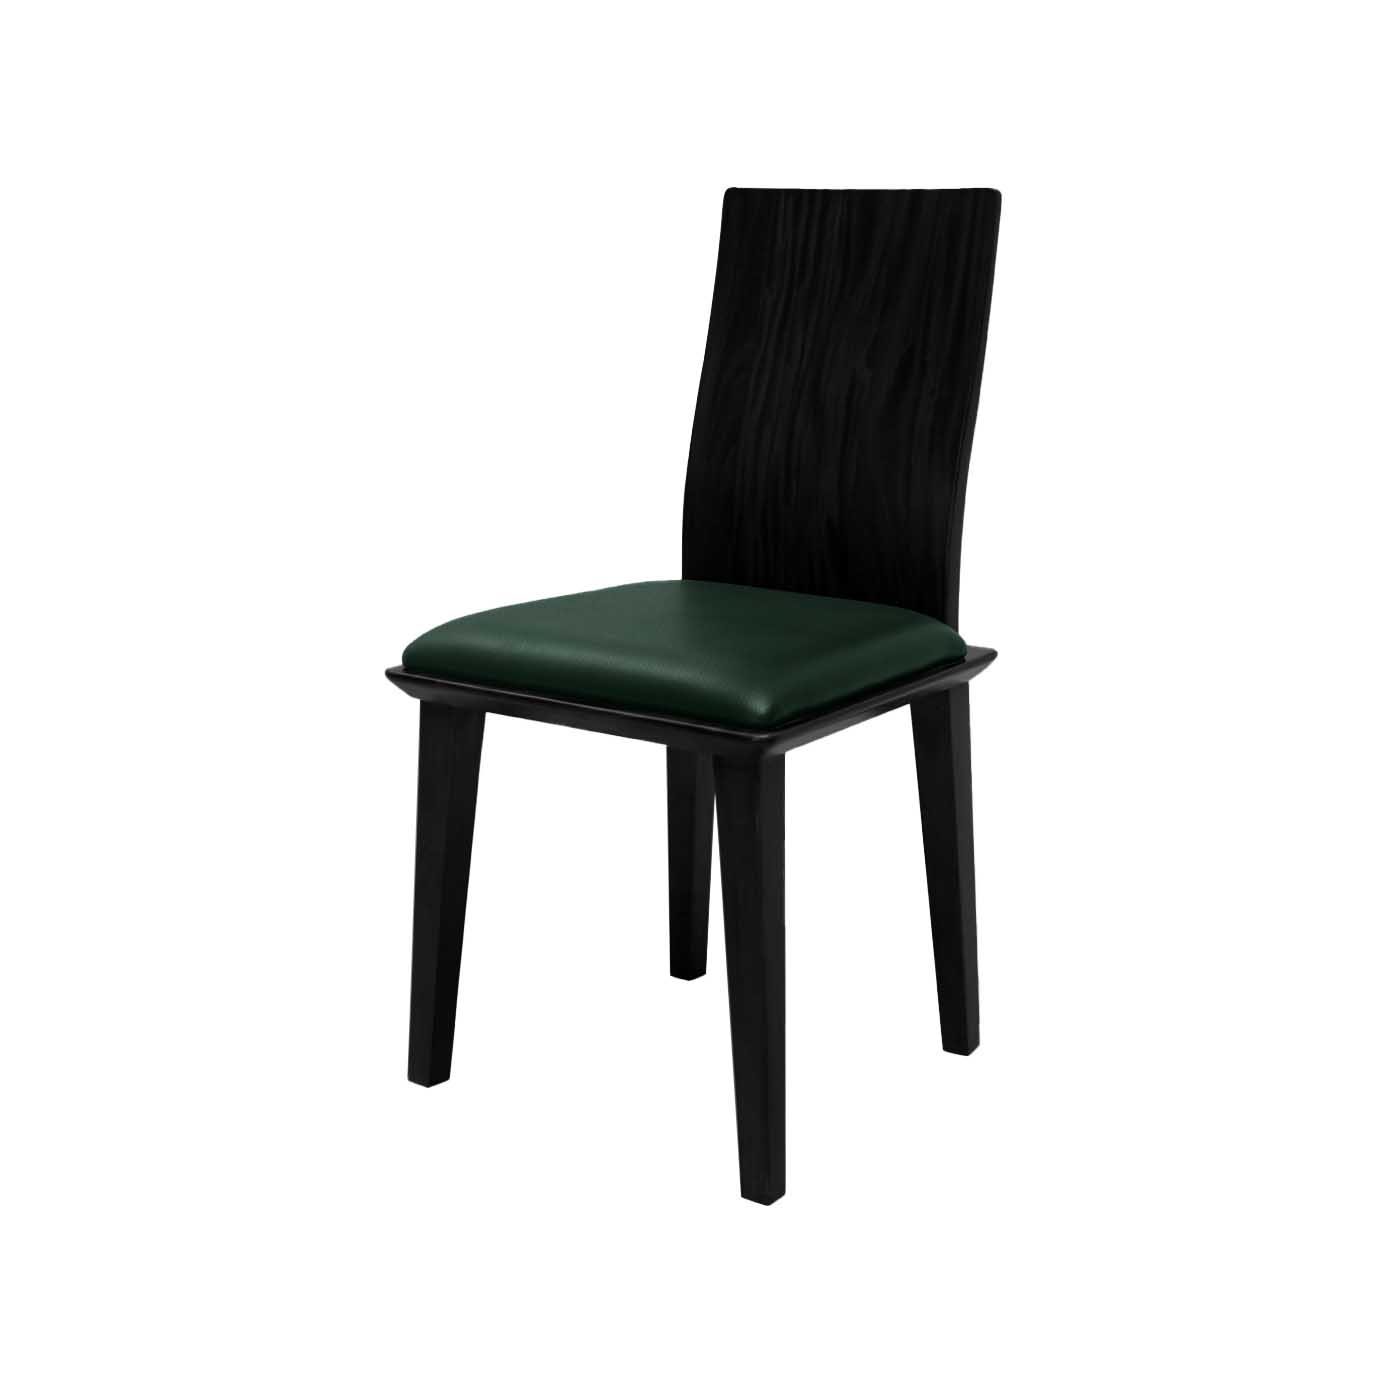 Muko Faux Leather Ebony Dining Chair